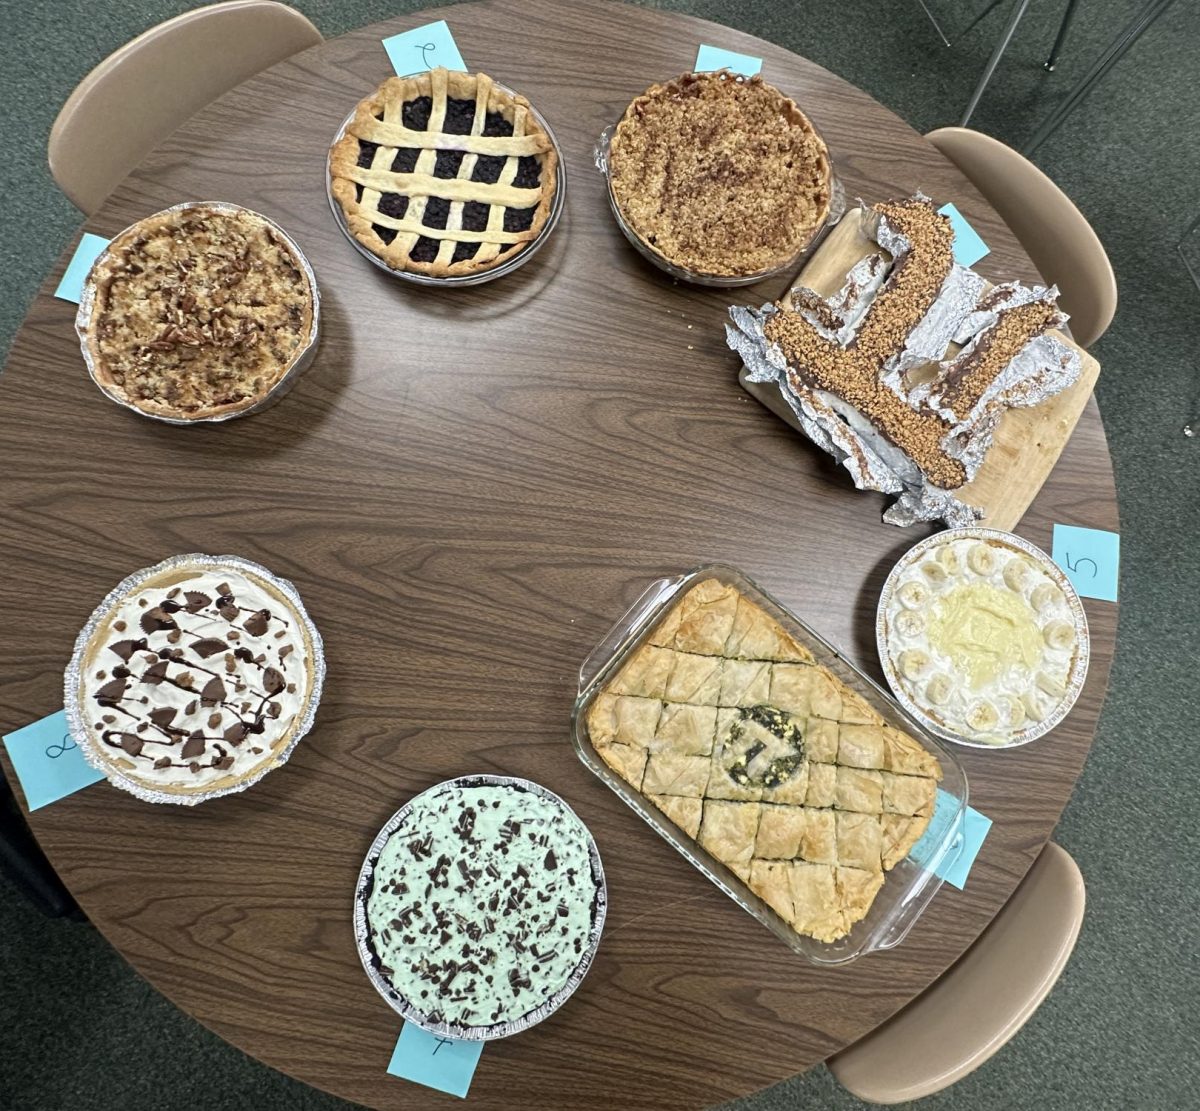 Calculus+students+made+pies+for+pi+day%2C+March+14.+Thomas+Schumacher+won+the+event+with+his+ice+cream+pie.+